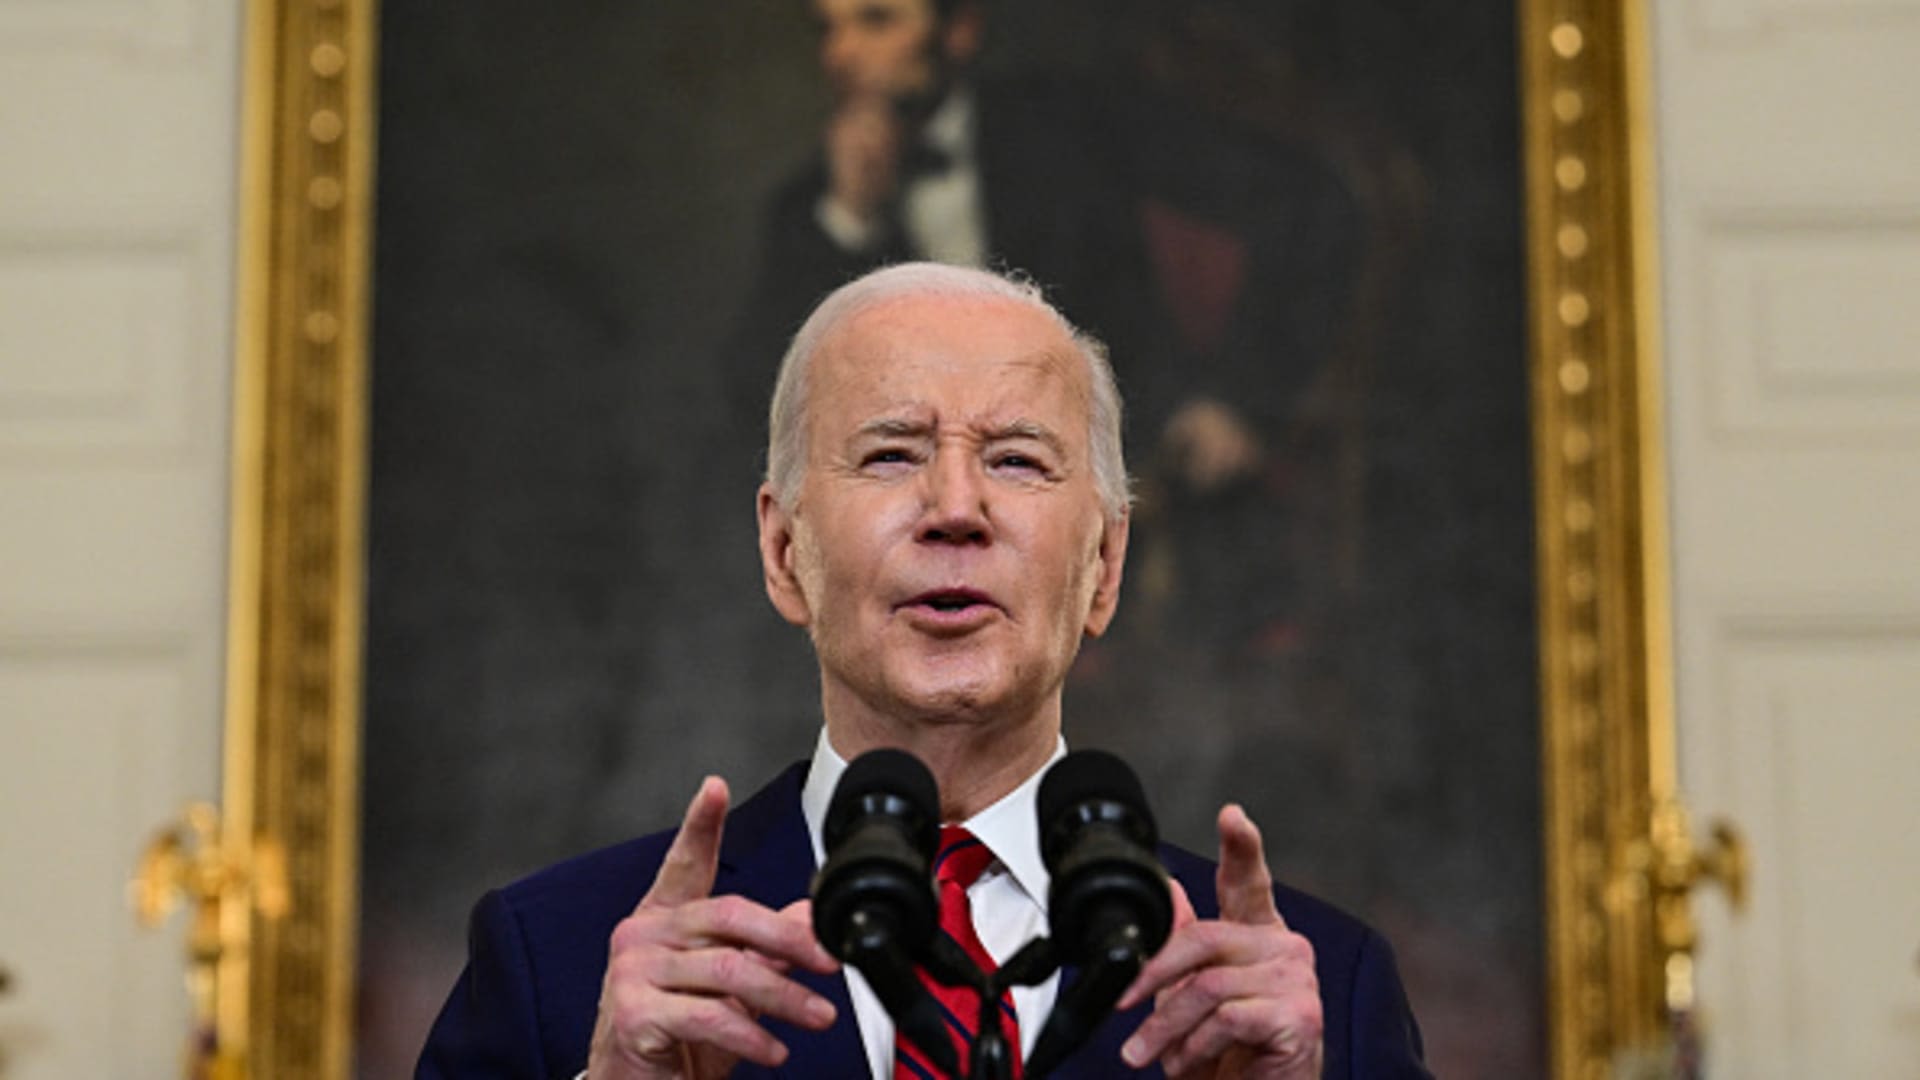 Biden replaces Obama-era infrastructure protections to defend against Chinese cyberthreats